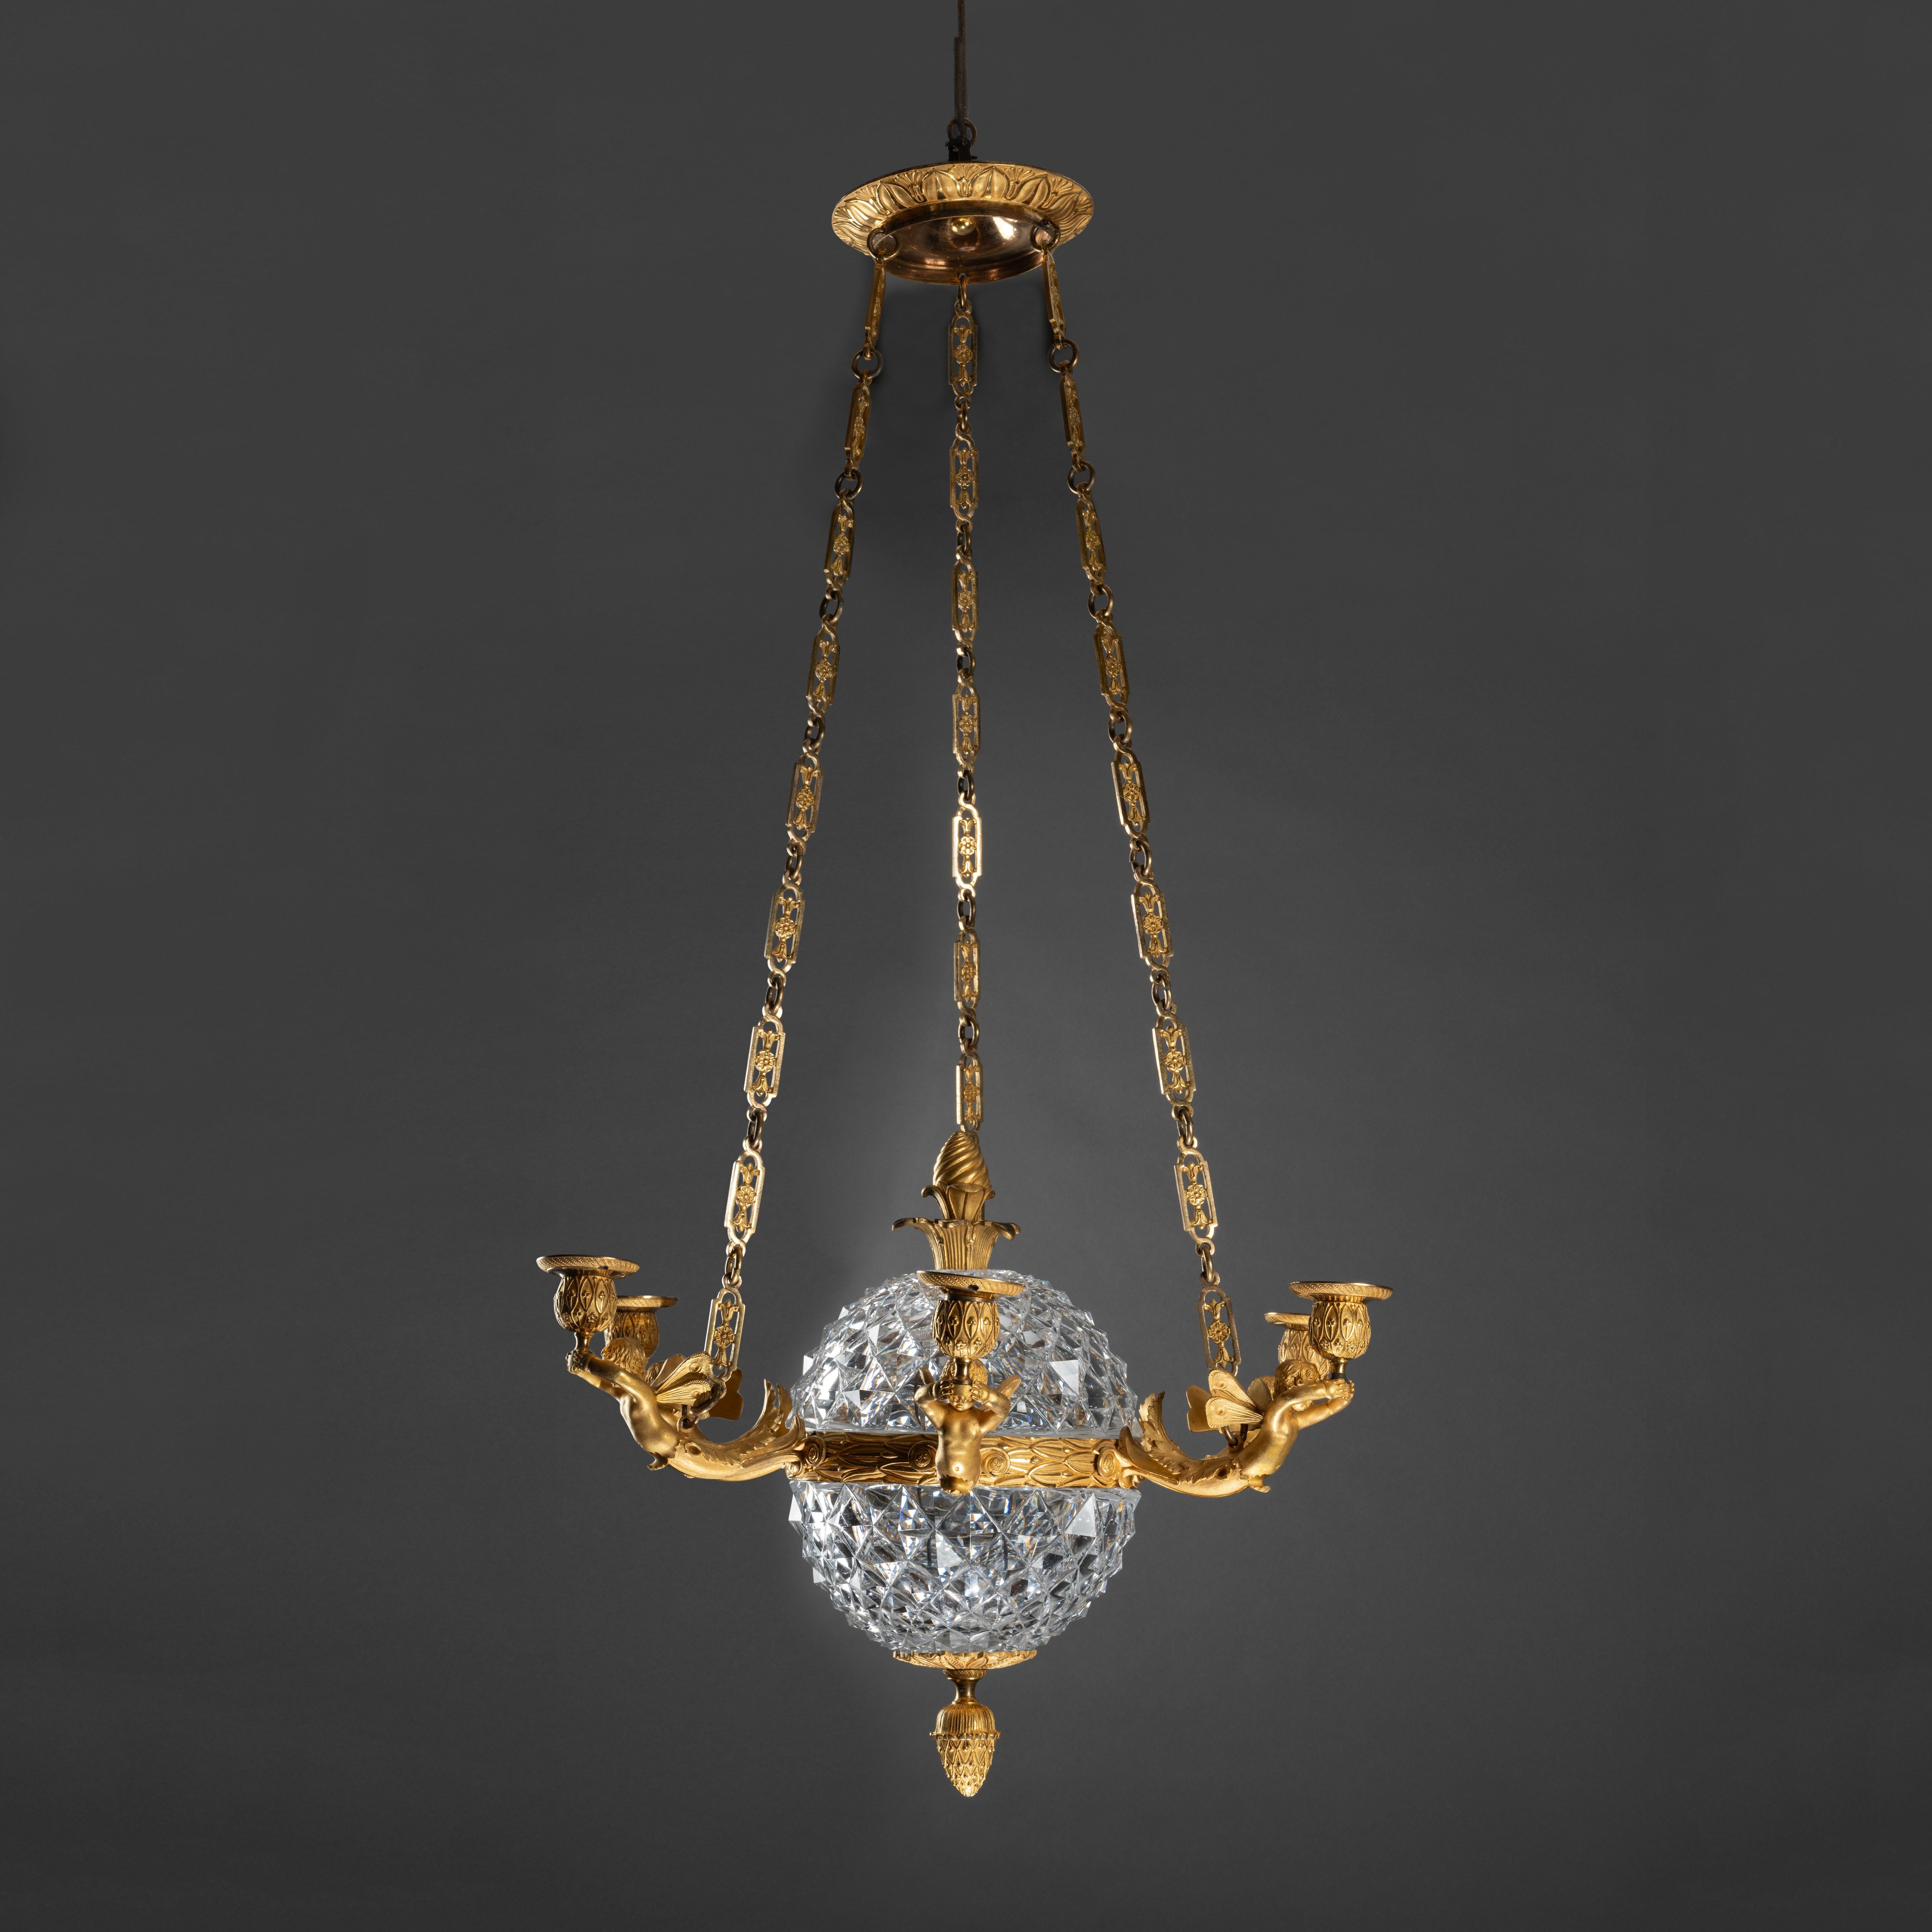 A circa 1810 Empire gilt bronze chandelier with zephyrs attributed to Antoine André RAVRIO (1759-1814), Paris 
The crystal globe attributed to Manufacture de cristaux du Mont-Cenis .

Dimensions:
H. 41.73 inch  Ø 21.26 inch

Spherical-shaped model